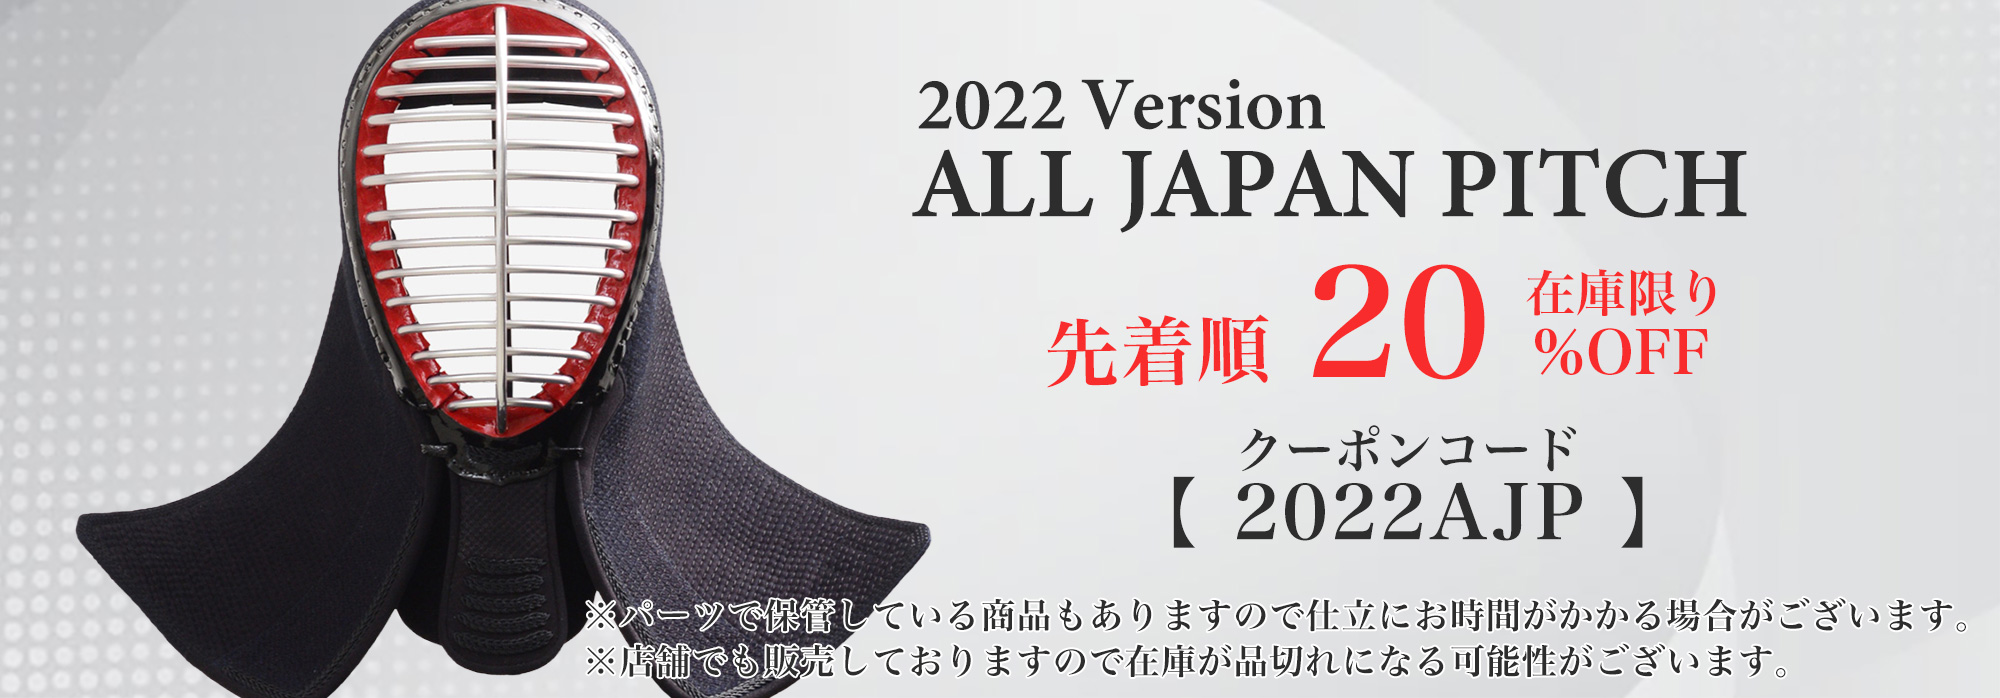 ALL JAPAN PITCH 2022限定セール